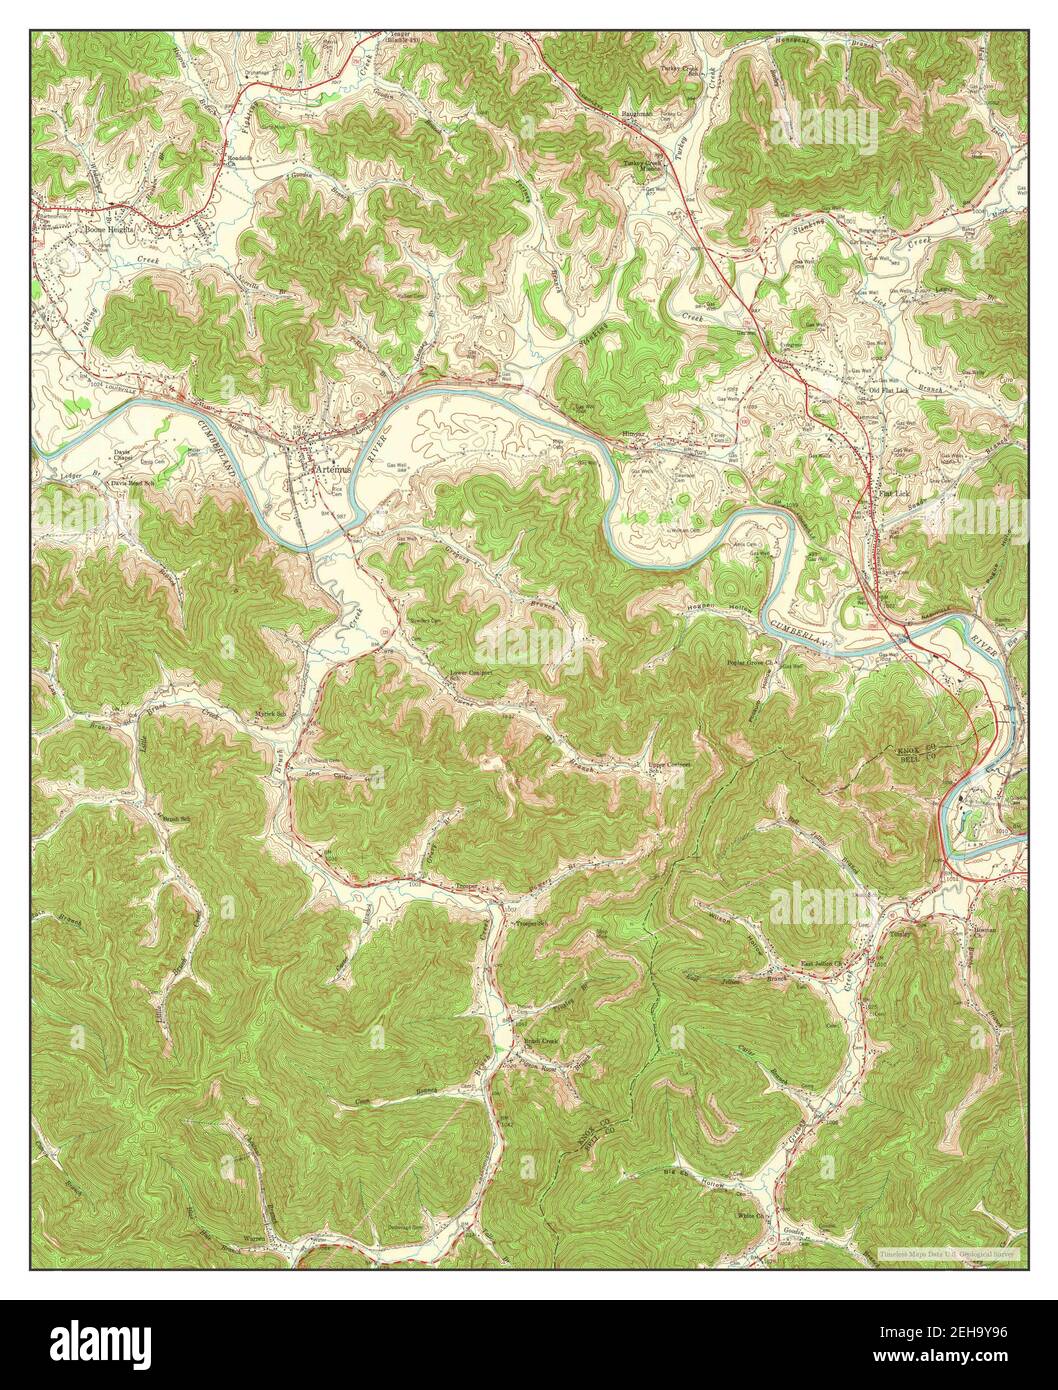 Artemus, Kentucky, map 1952, 1:24000, United States of America by Timeless Maps, data U.S. Geological Survey Stock Photo